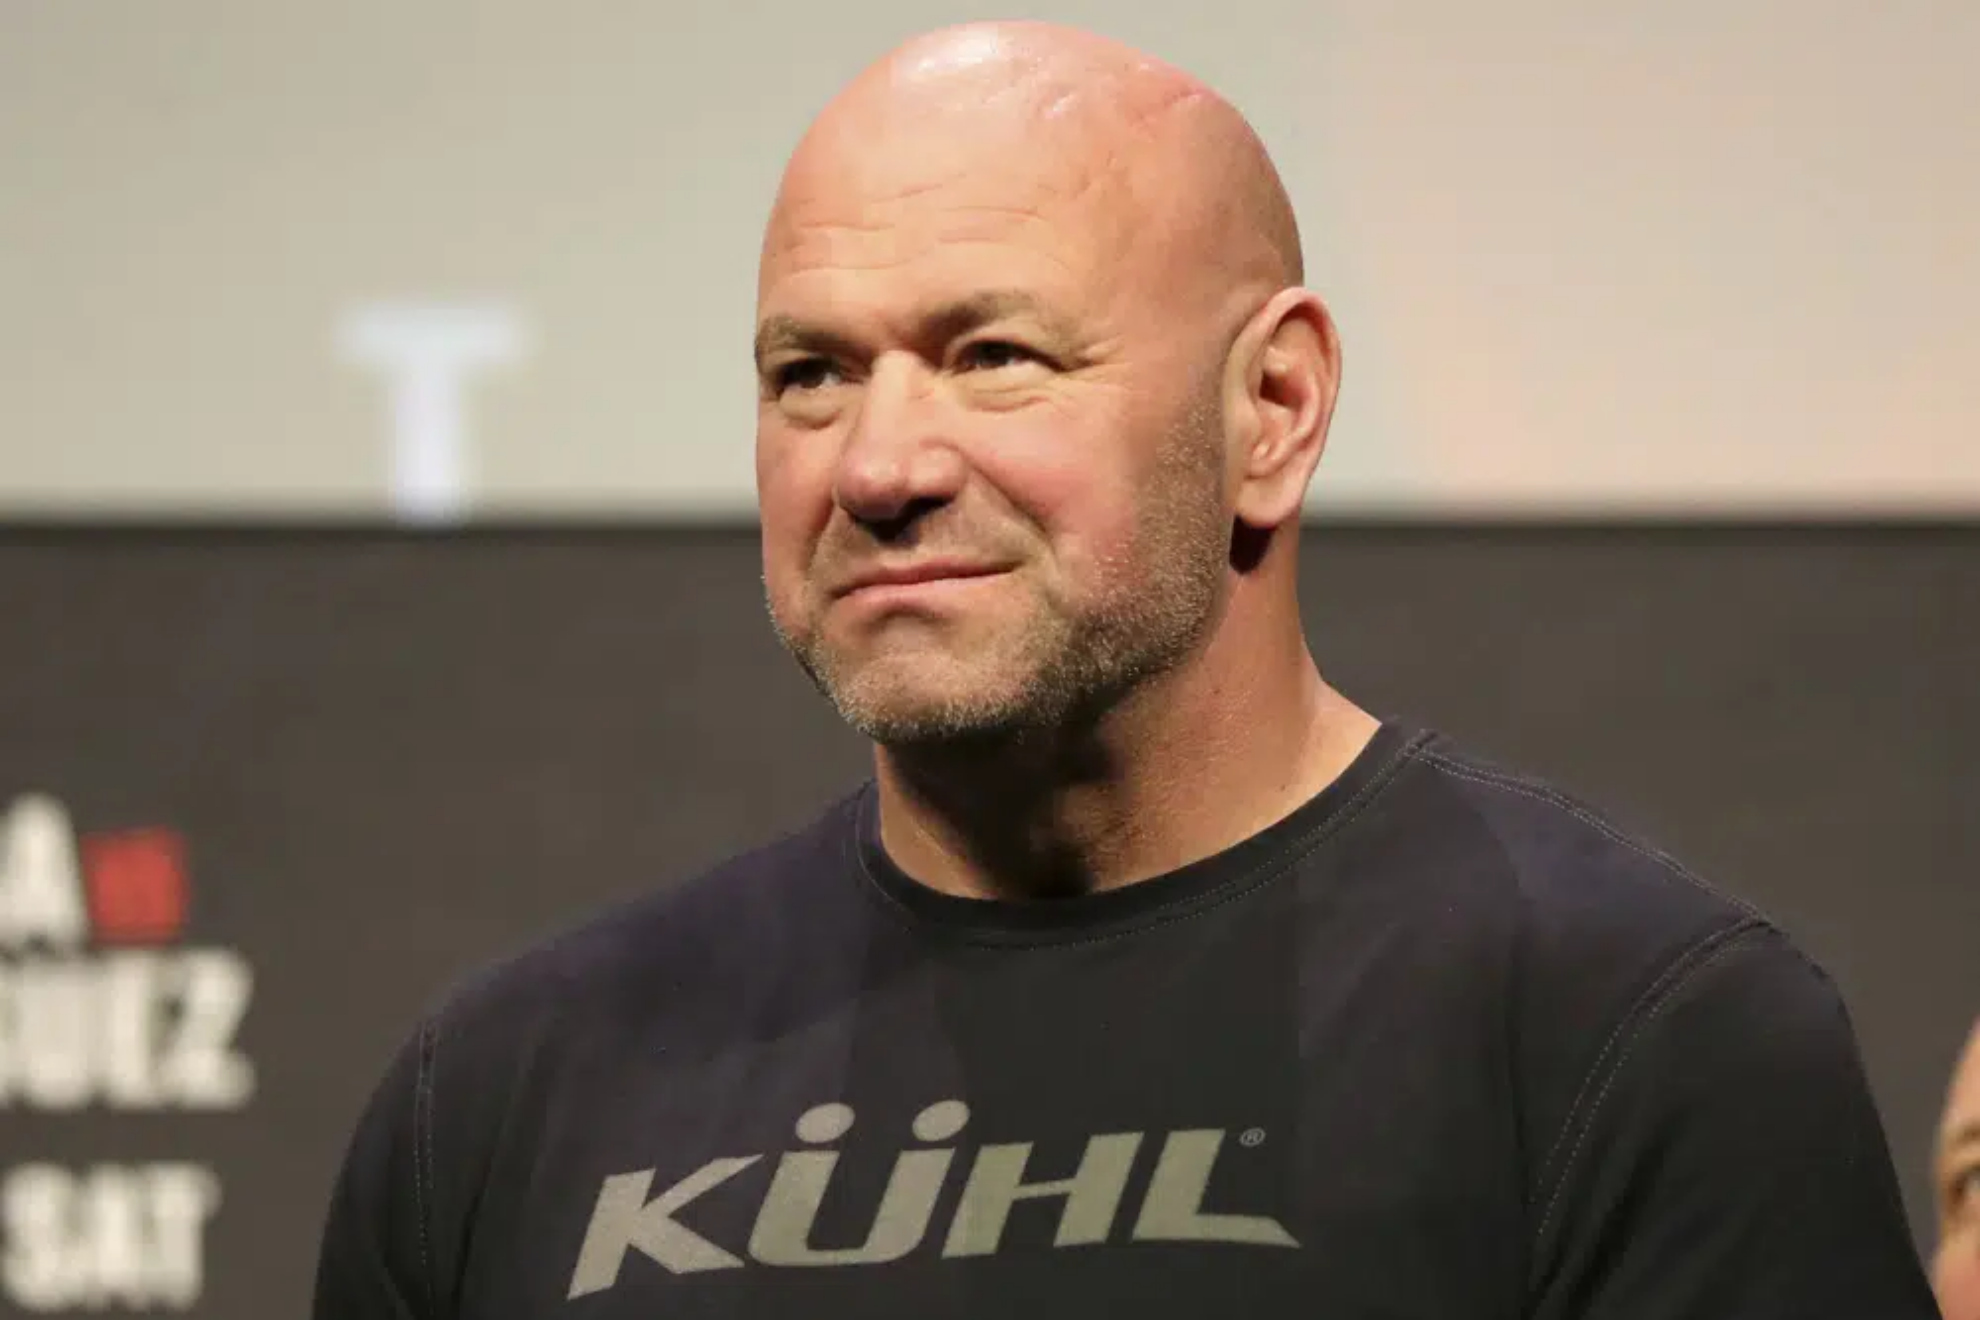 The UFC president, Dana White, made an appearance on "The Pat McAfee Show"